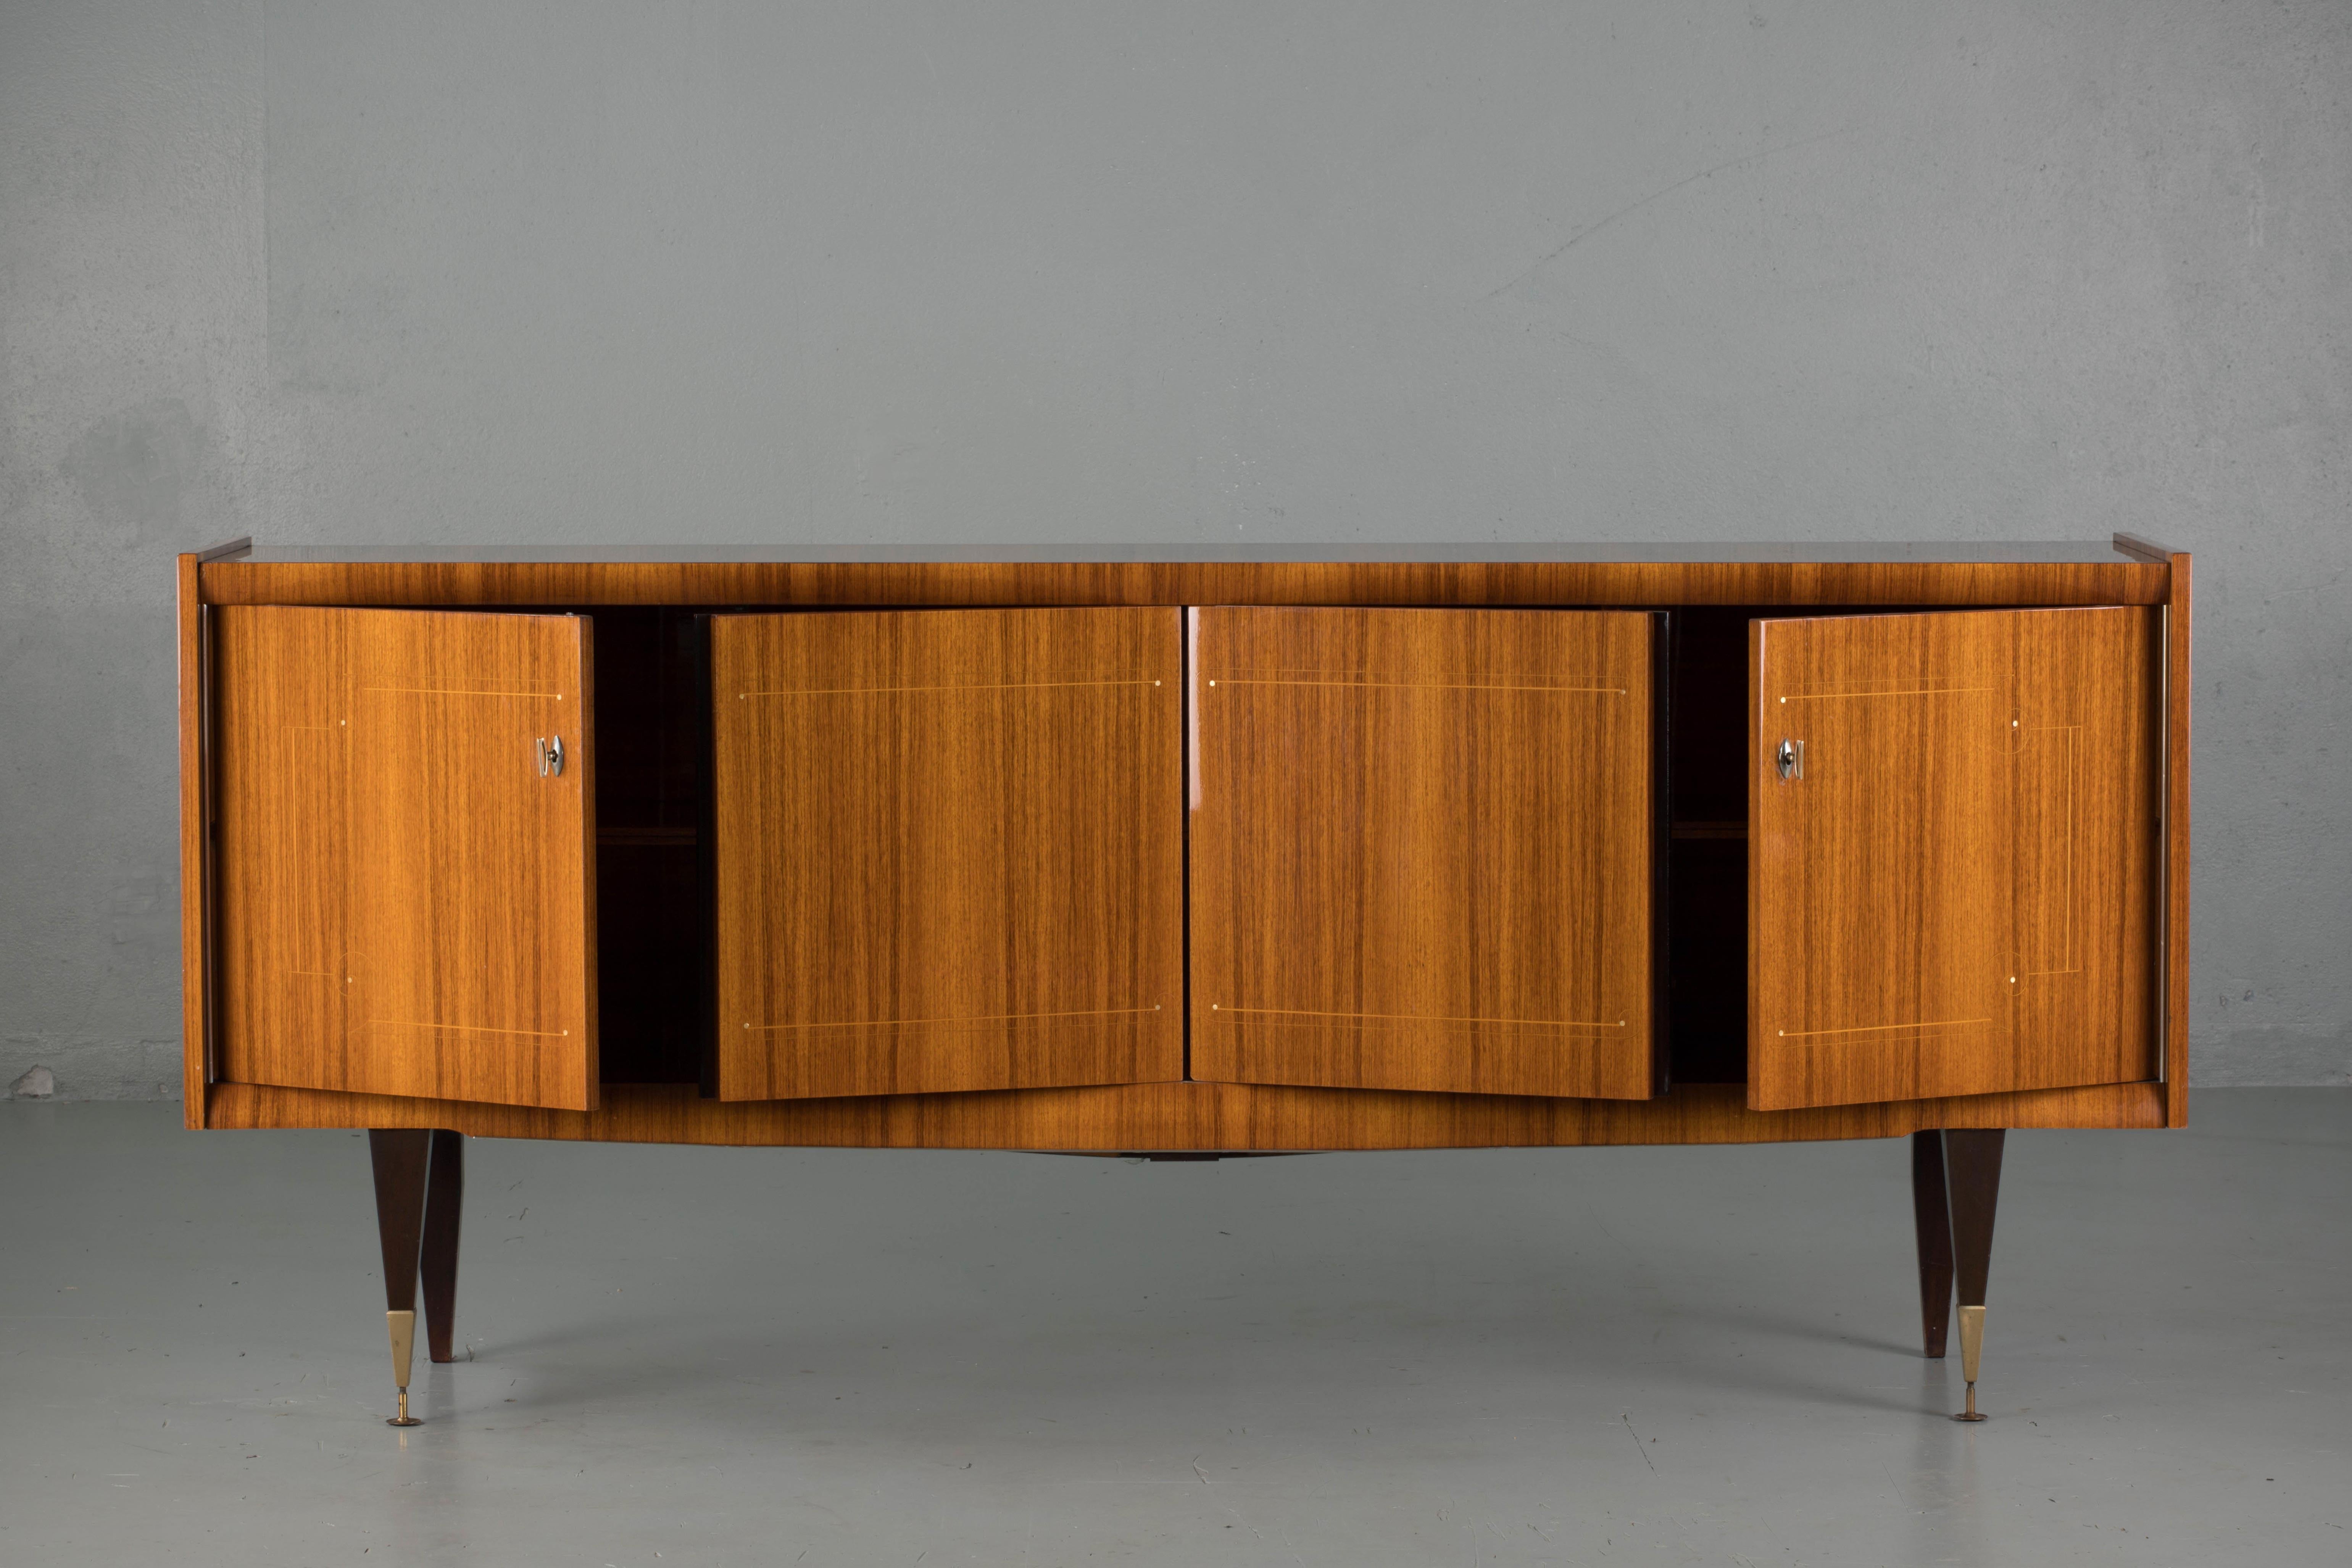 French Large Art Deco Sideboard Macassar, 1940s (Art déco)